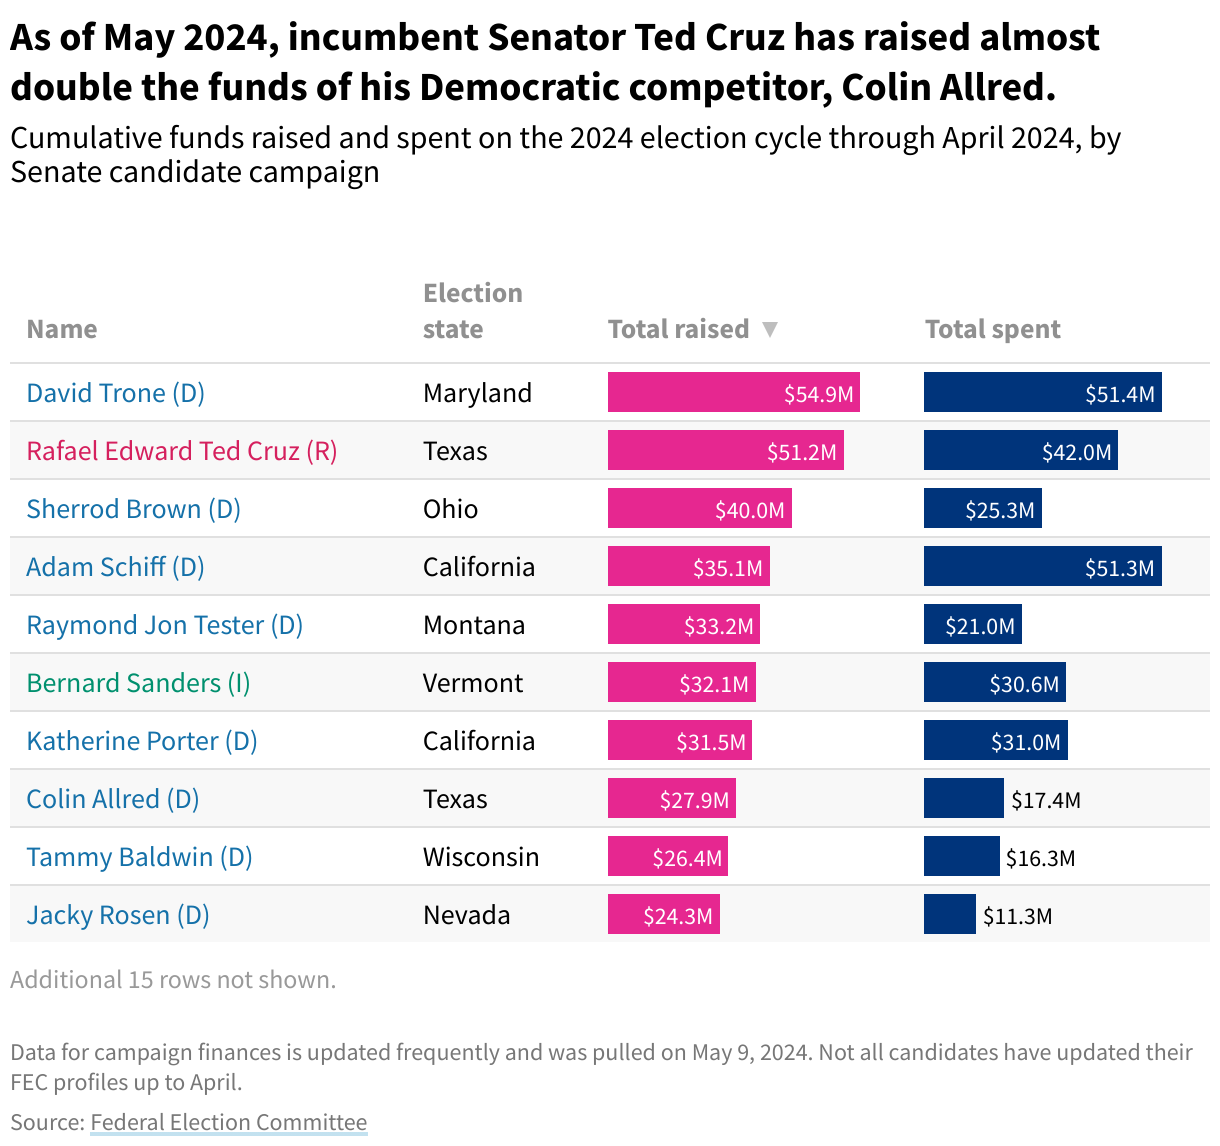 A table showing how much 25 of the 2024 Senate candidates have raised and spent (selected based on the rank of total funds raised as of May 9, 2024).